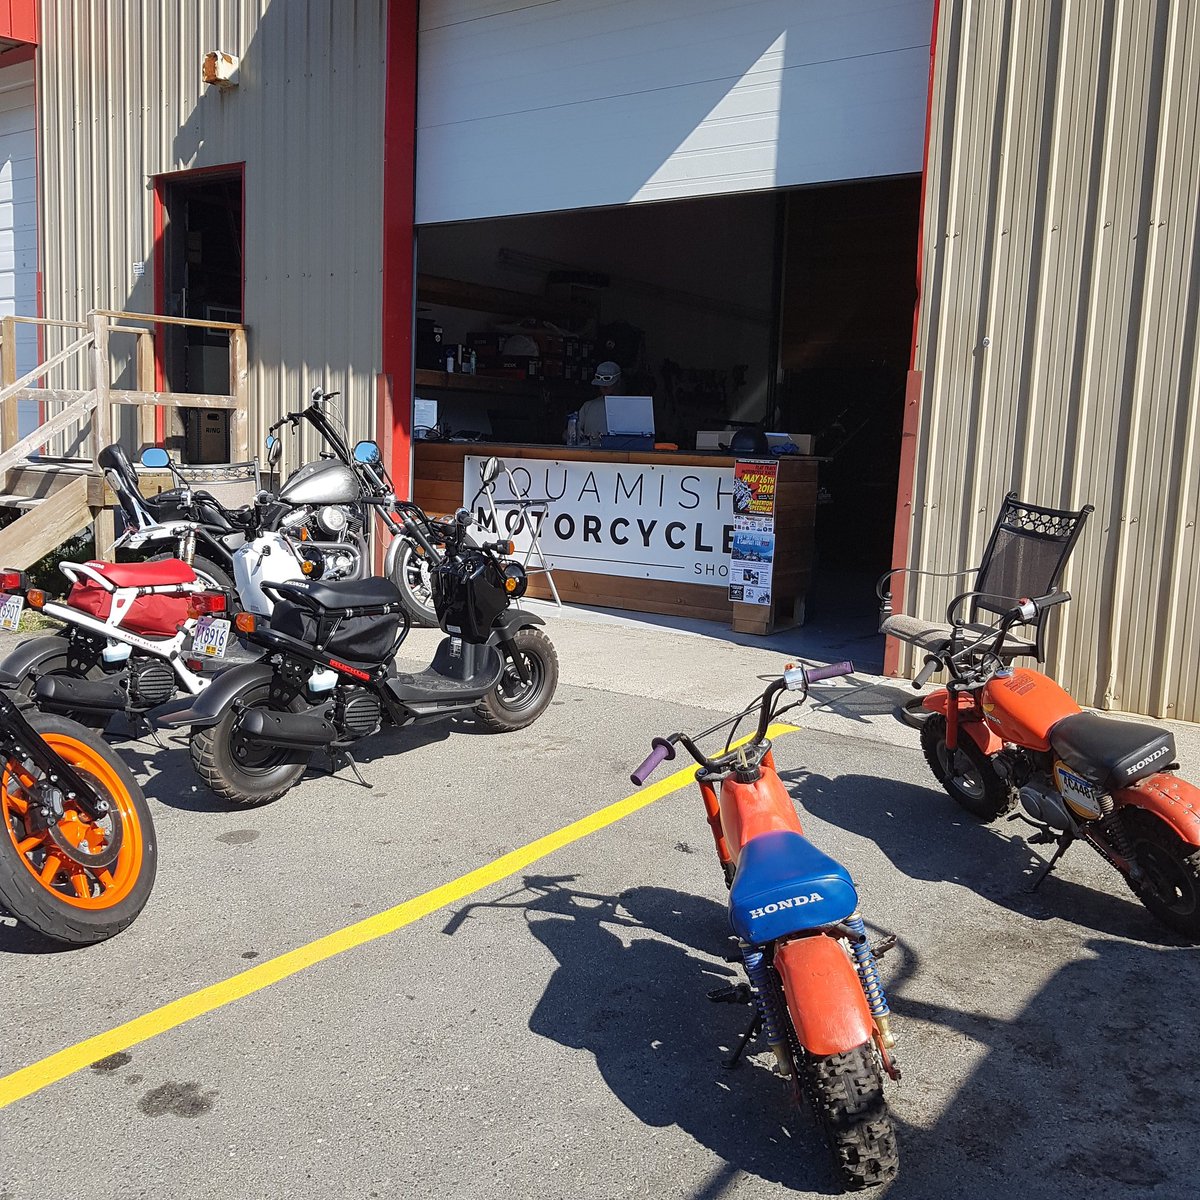 Squamish Motorcycles. Small place, off the beaten path but if you can find it....Best..service...EVER.
.
.
.
#bcma #bcmotorcycle #motorcycle #motorcyclerepair #bestinclass
#customerservice #theseguysgetit